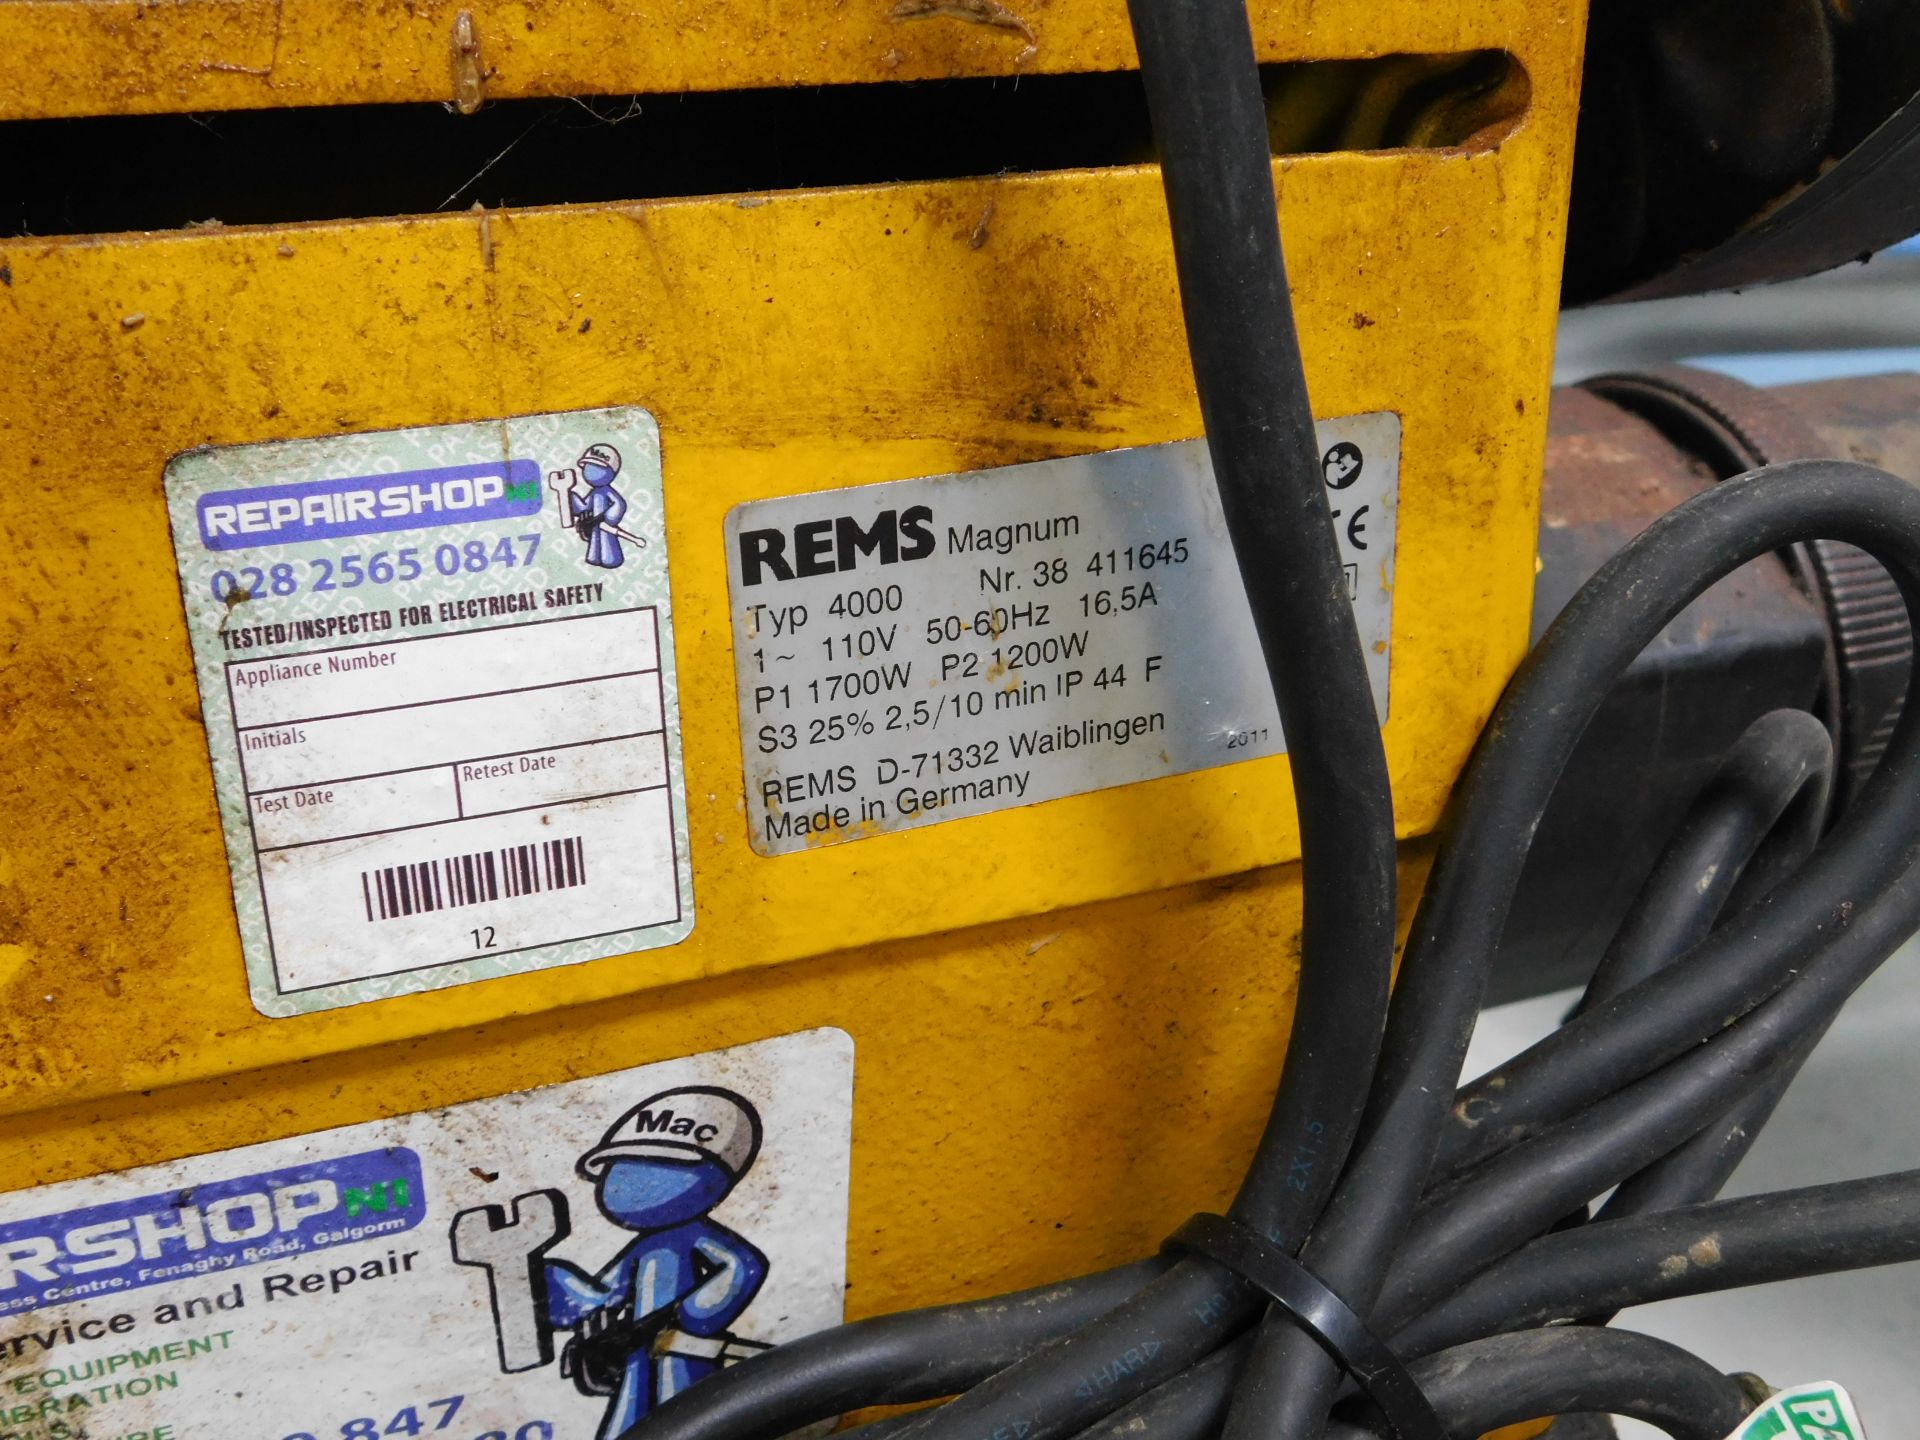 REMS Magnum Type 4000 Pipe Threader, Serial Number 38411645 on Wheeled Stand (Location: Brentwood. - Image 4 of 4